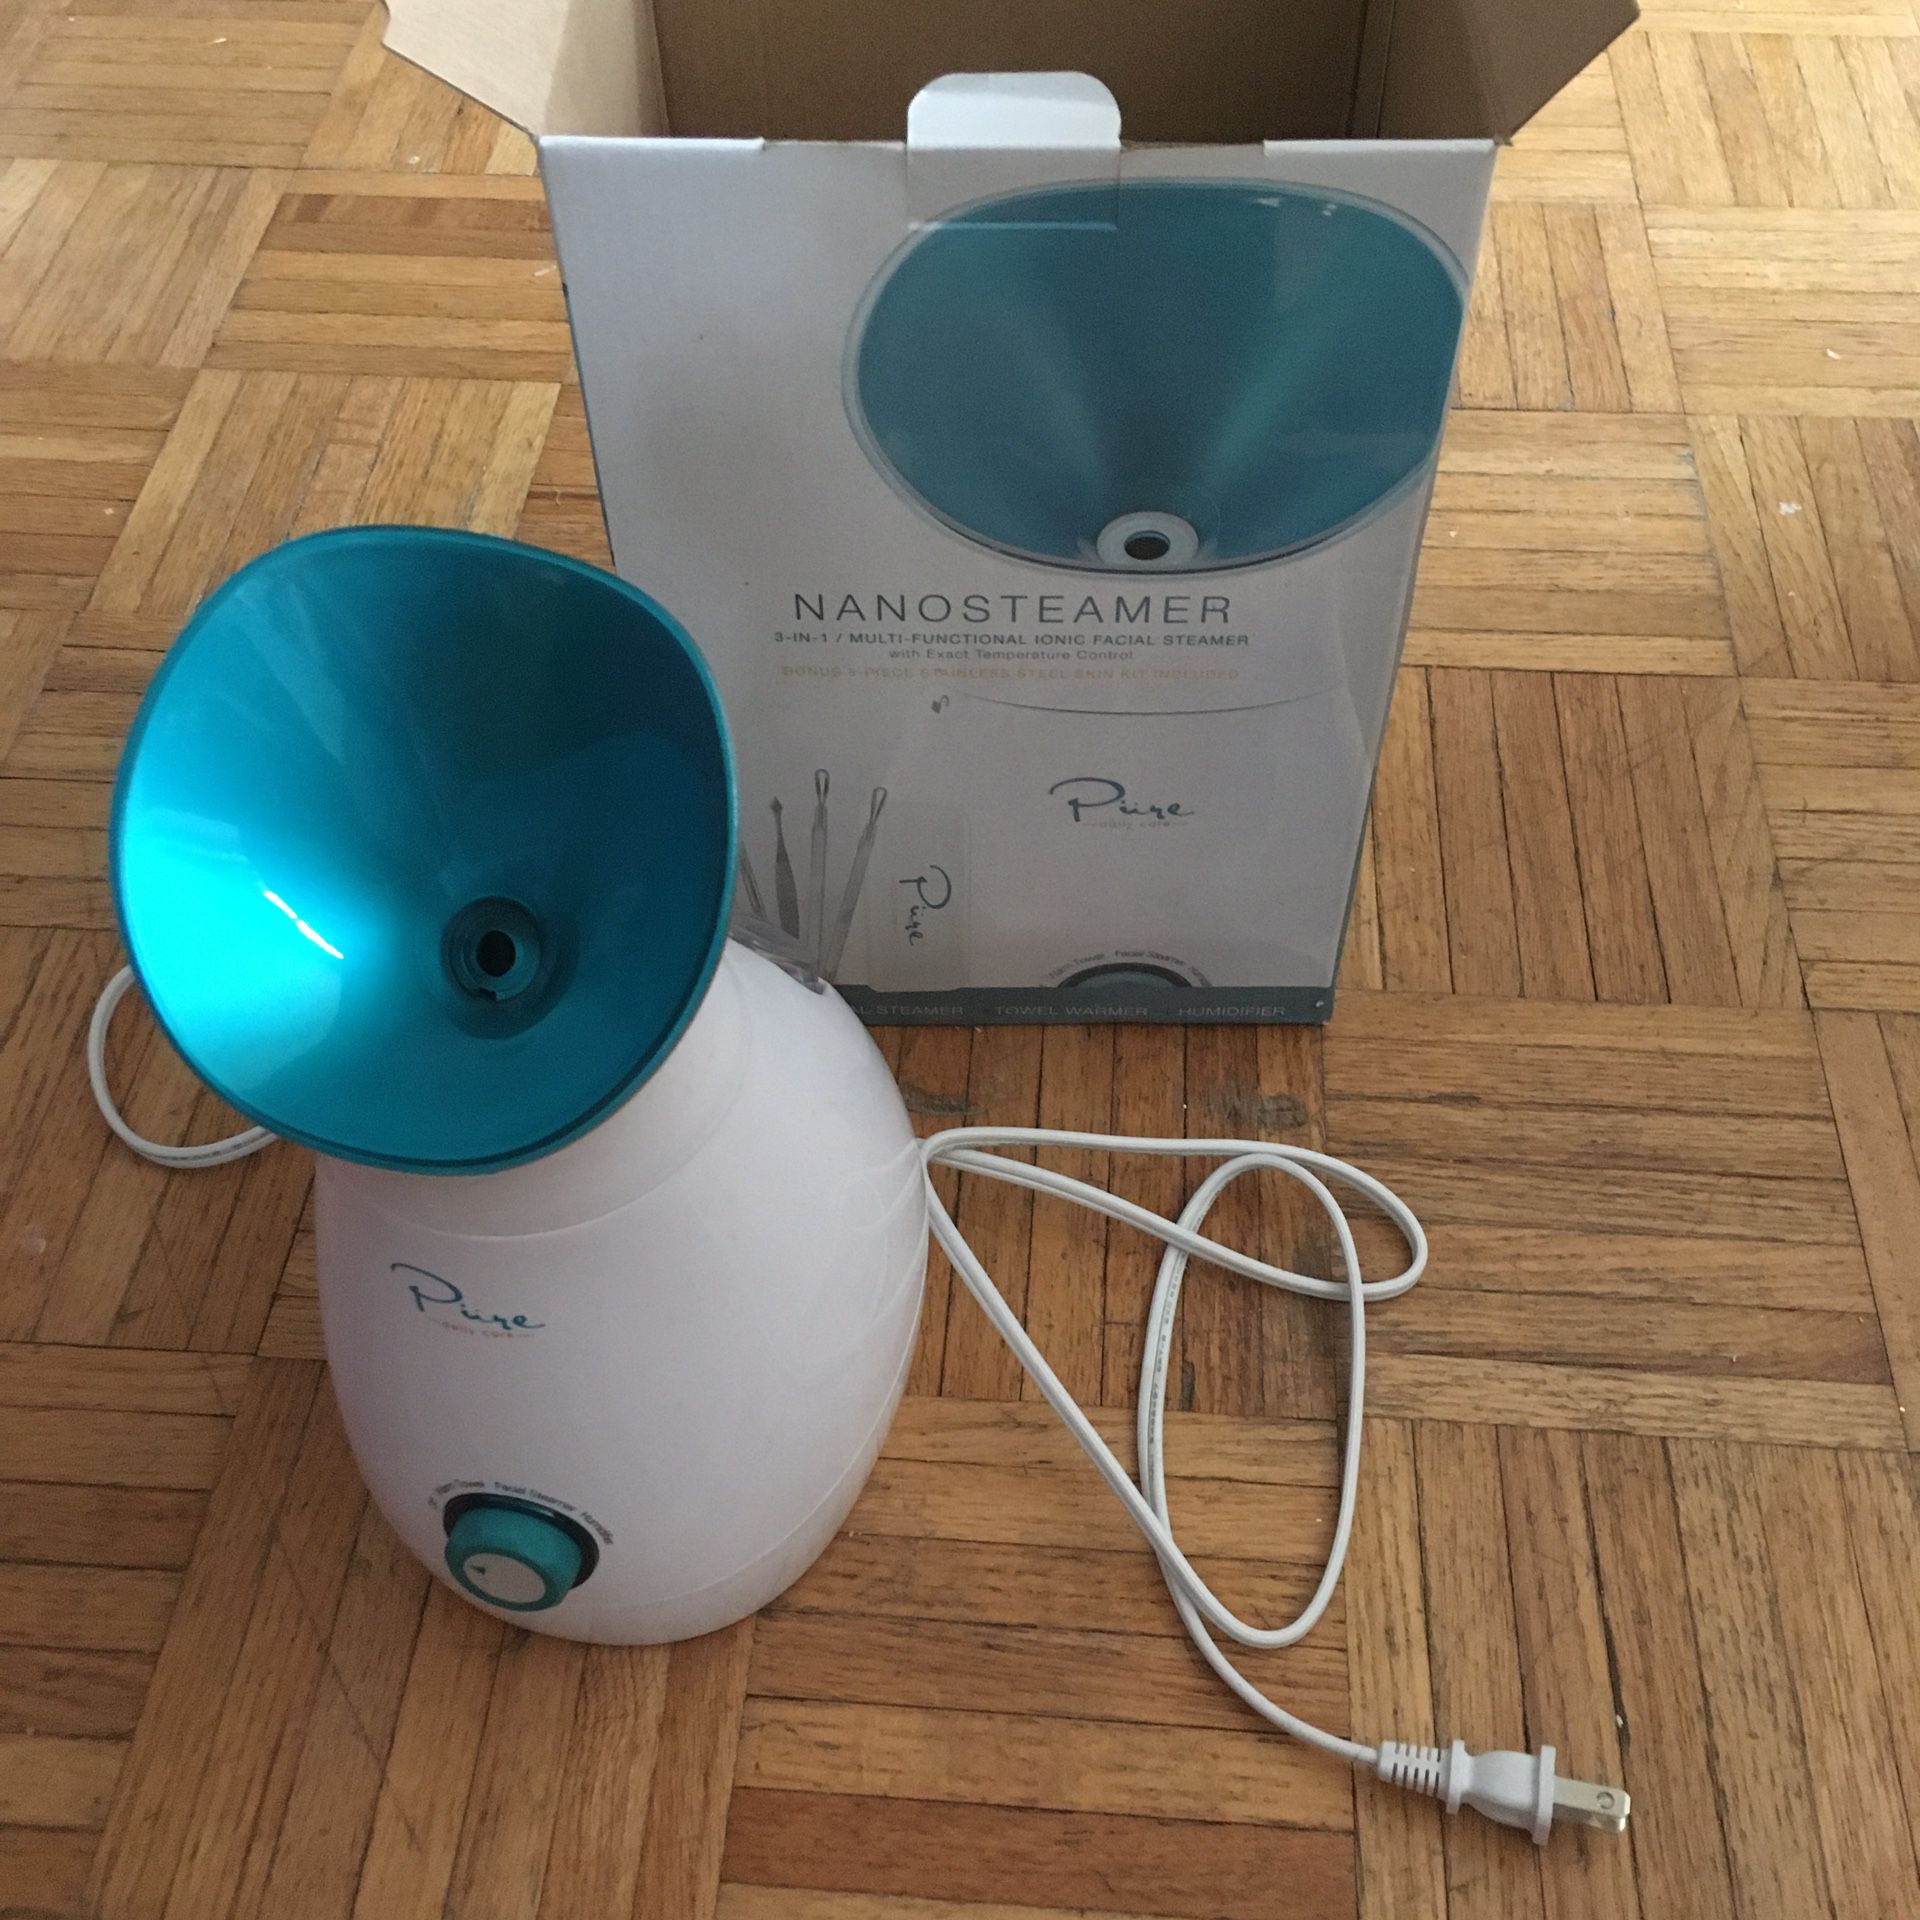 NanoSteamer 3-in-1 Ionic Facial Steamer By Pure Daily Care. Does not come with tools. Steamer only. 